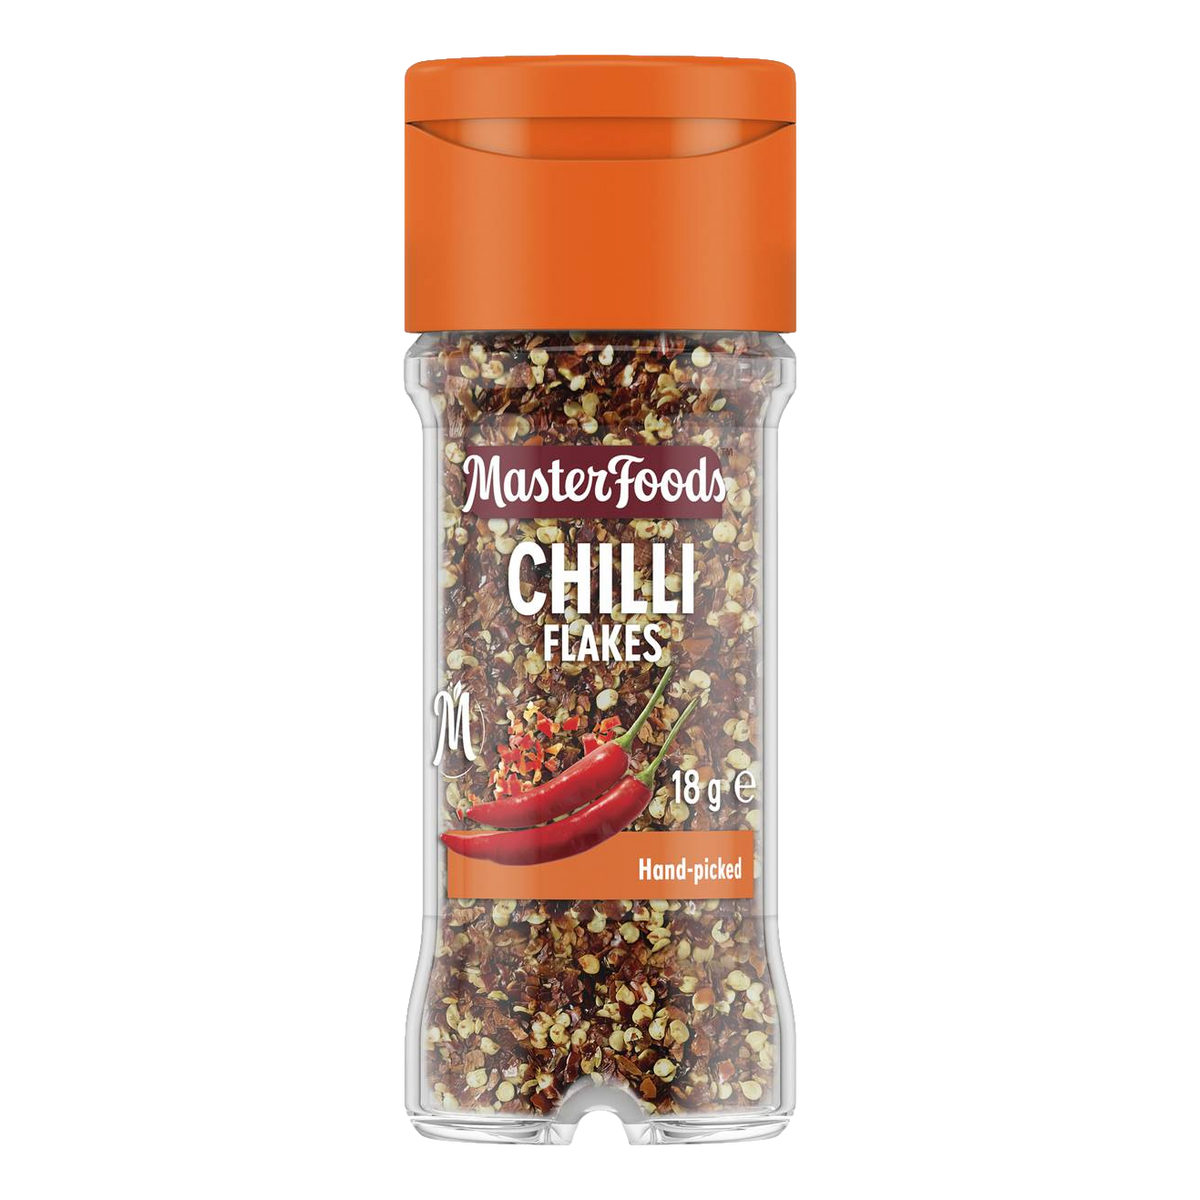 Masterfoods Chilli Flakes 18g